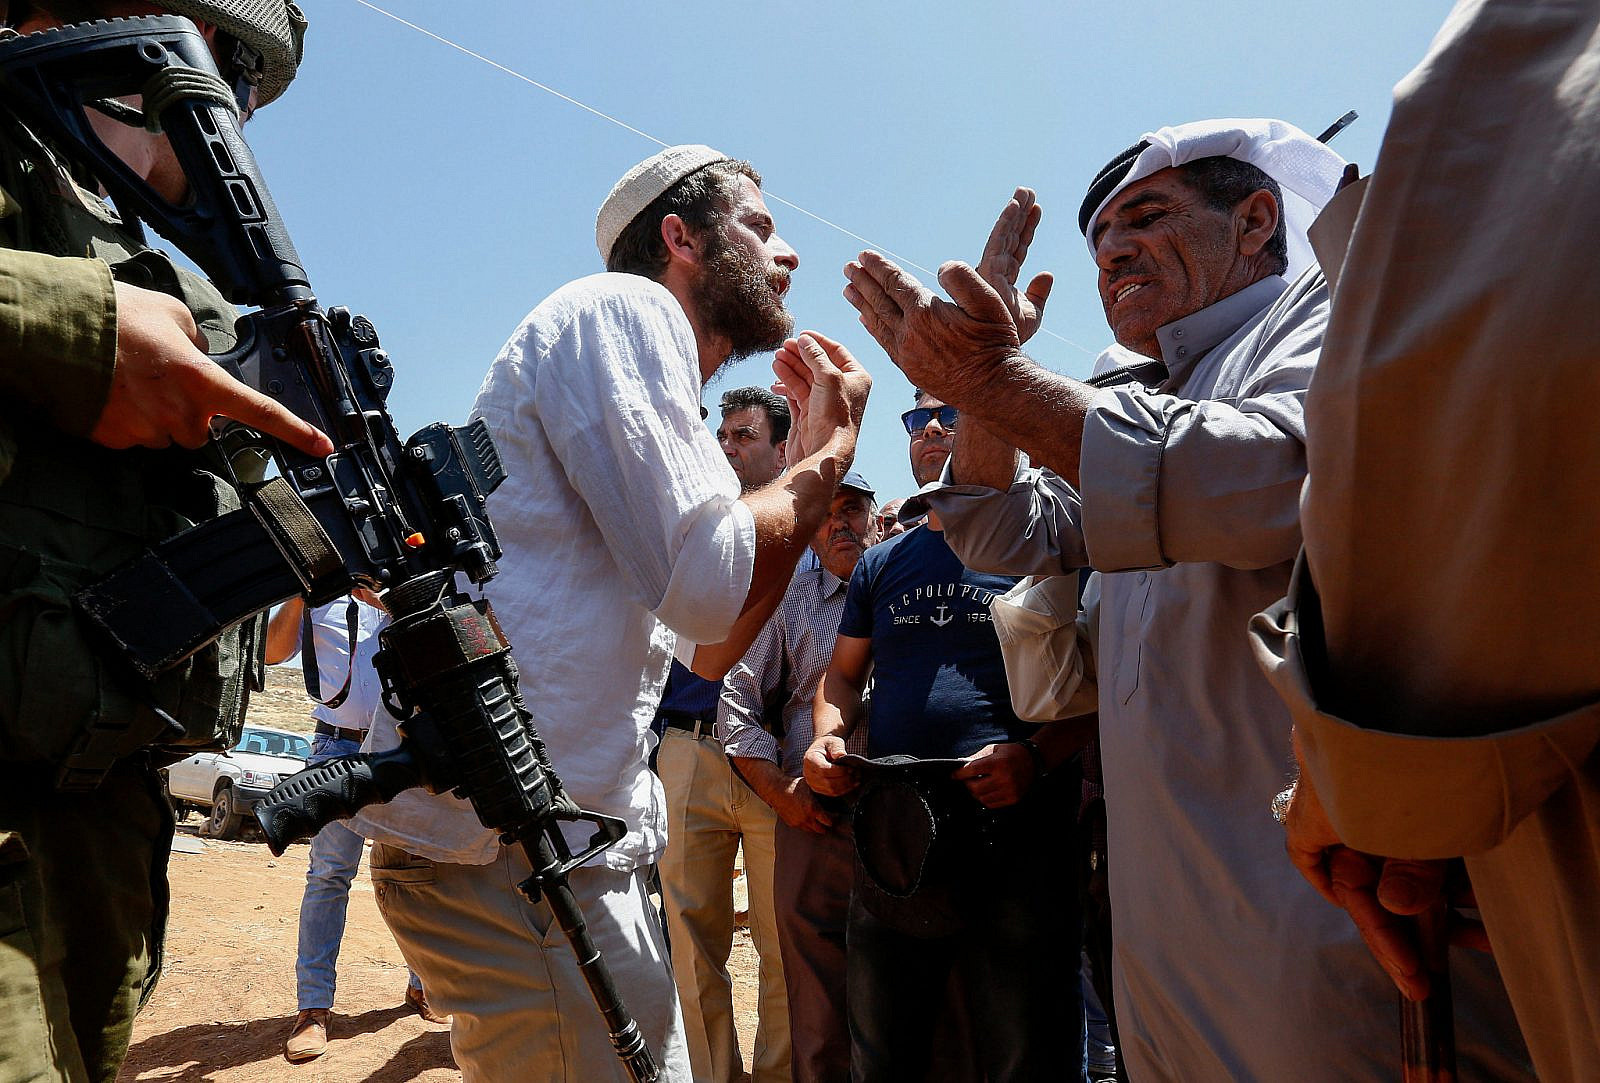 An Israeli settler argues with Palestinians during a protest against a new tent placed by Israeli settlers near Pnei Hever settlement, in the West bank village of Bani Naem on June 23, 2018. (Wisam Hashlamoun/Flash90)